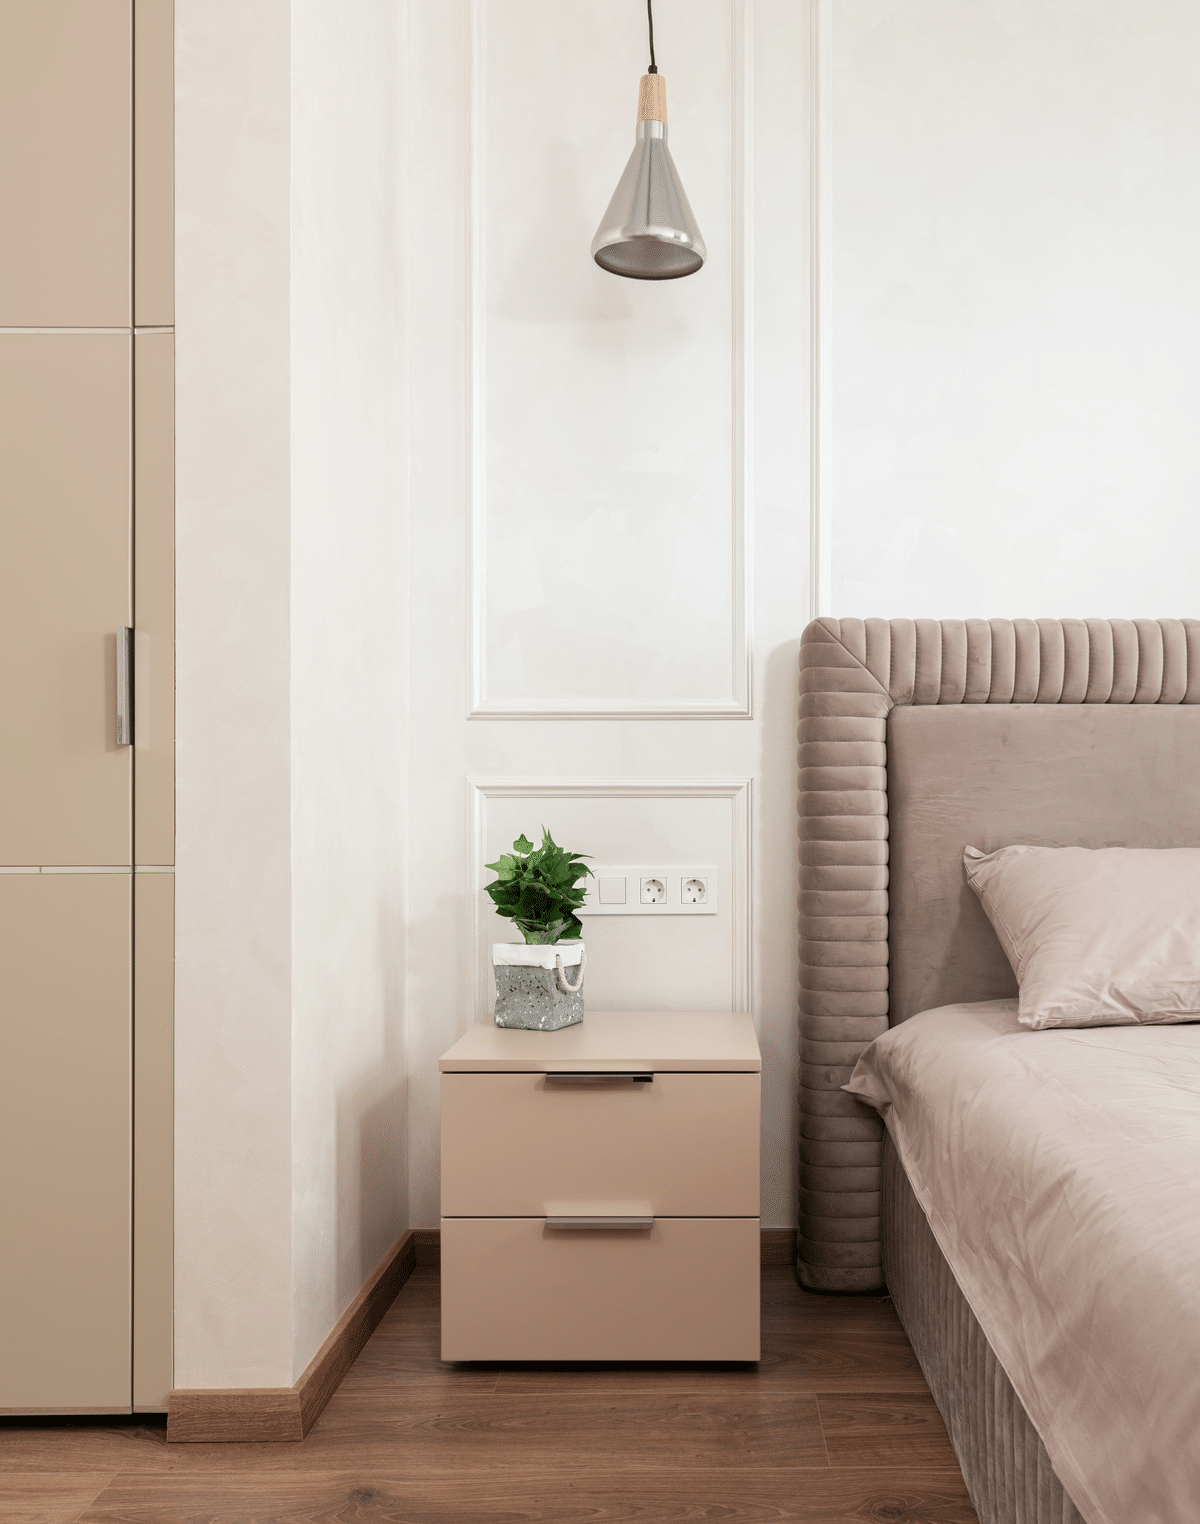 bedside table with a plant on it and a cone-shaped lamp suspended above